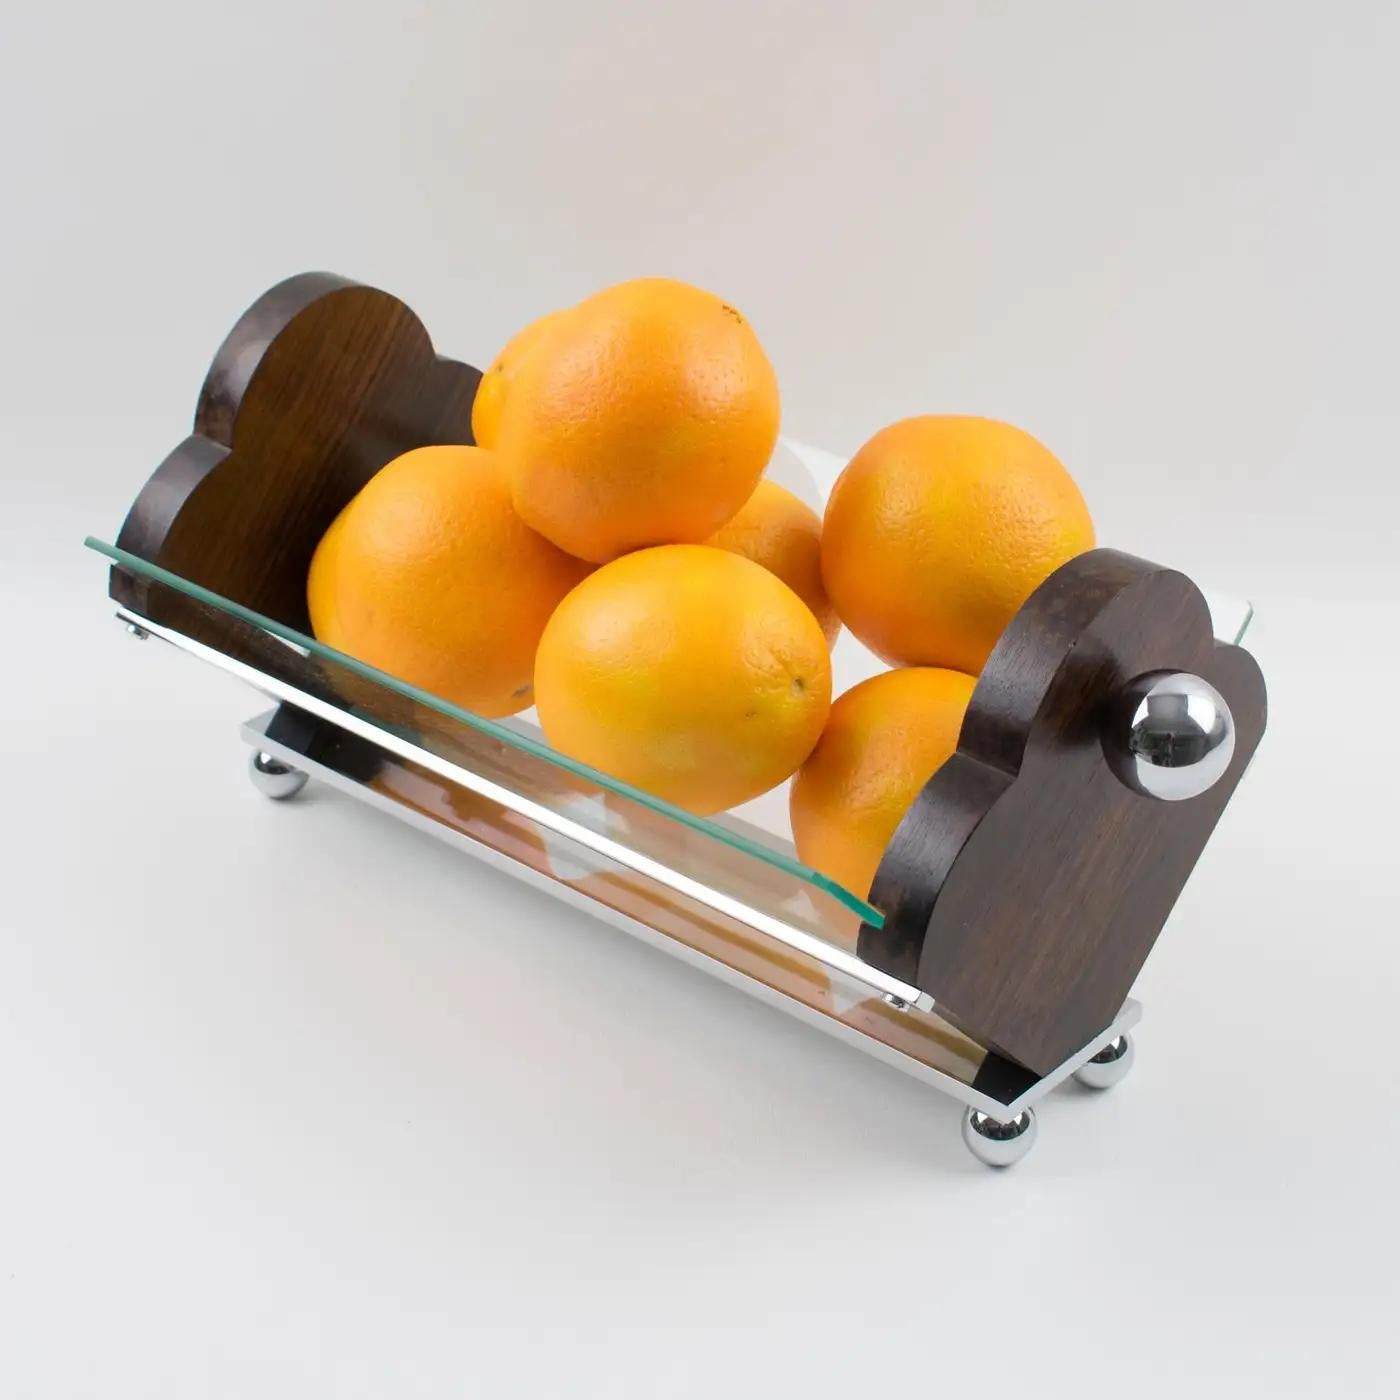 This sophisticated Art Deco centerpiece, serving bowl, or decorative fruit or bread basket was manufactured in France in the 1930s. The Macassar wood sides have two large chromed metal ball handles. A chromed metal structure holds a shaped glass